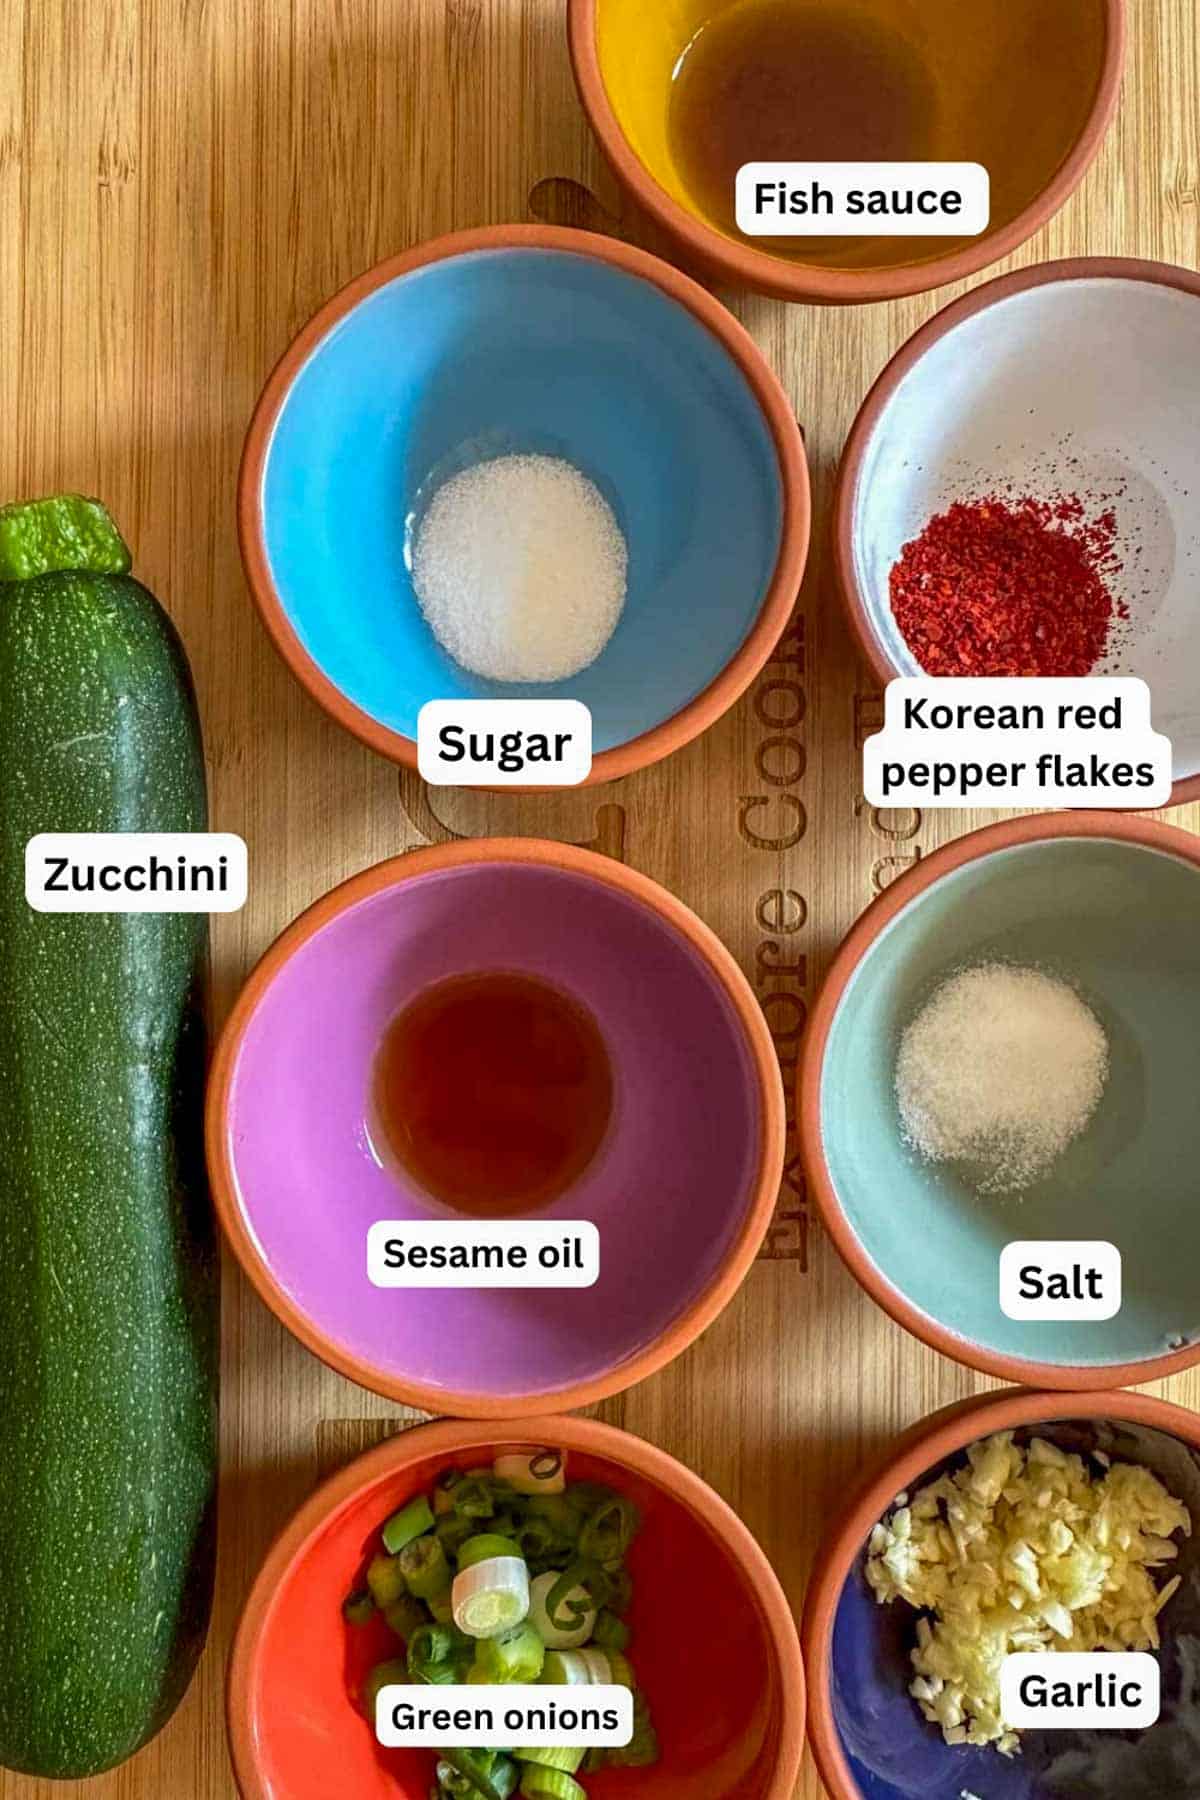 Ingredients for Korean Zucchini Side Dish displayed in small bowls including fish sauce, sugar, Korean red pepper flakes, sesame oil, salt, green onions, and garlic. There is also one zucchini.